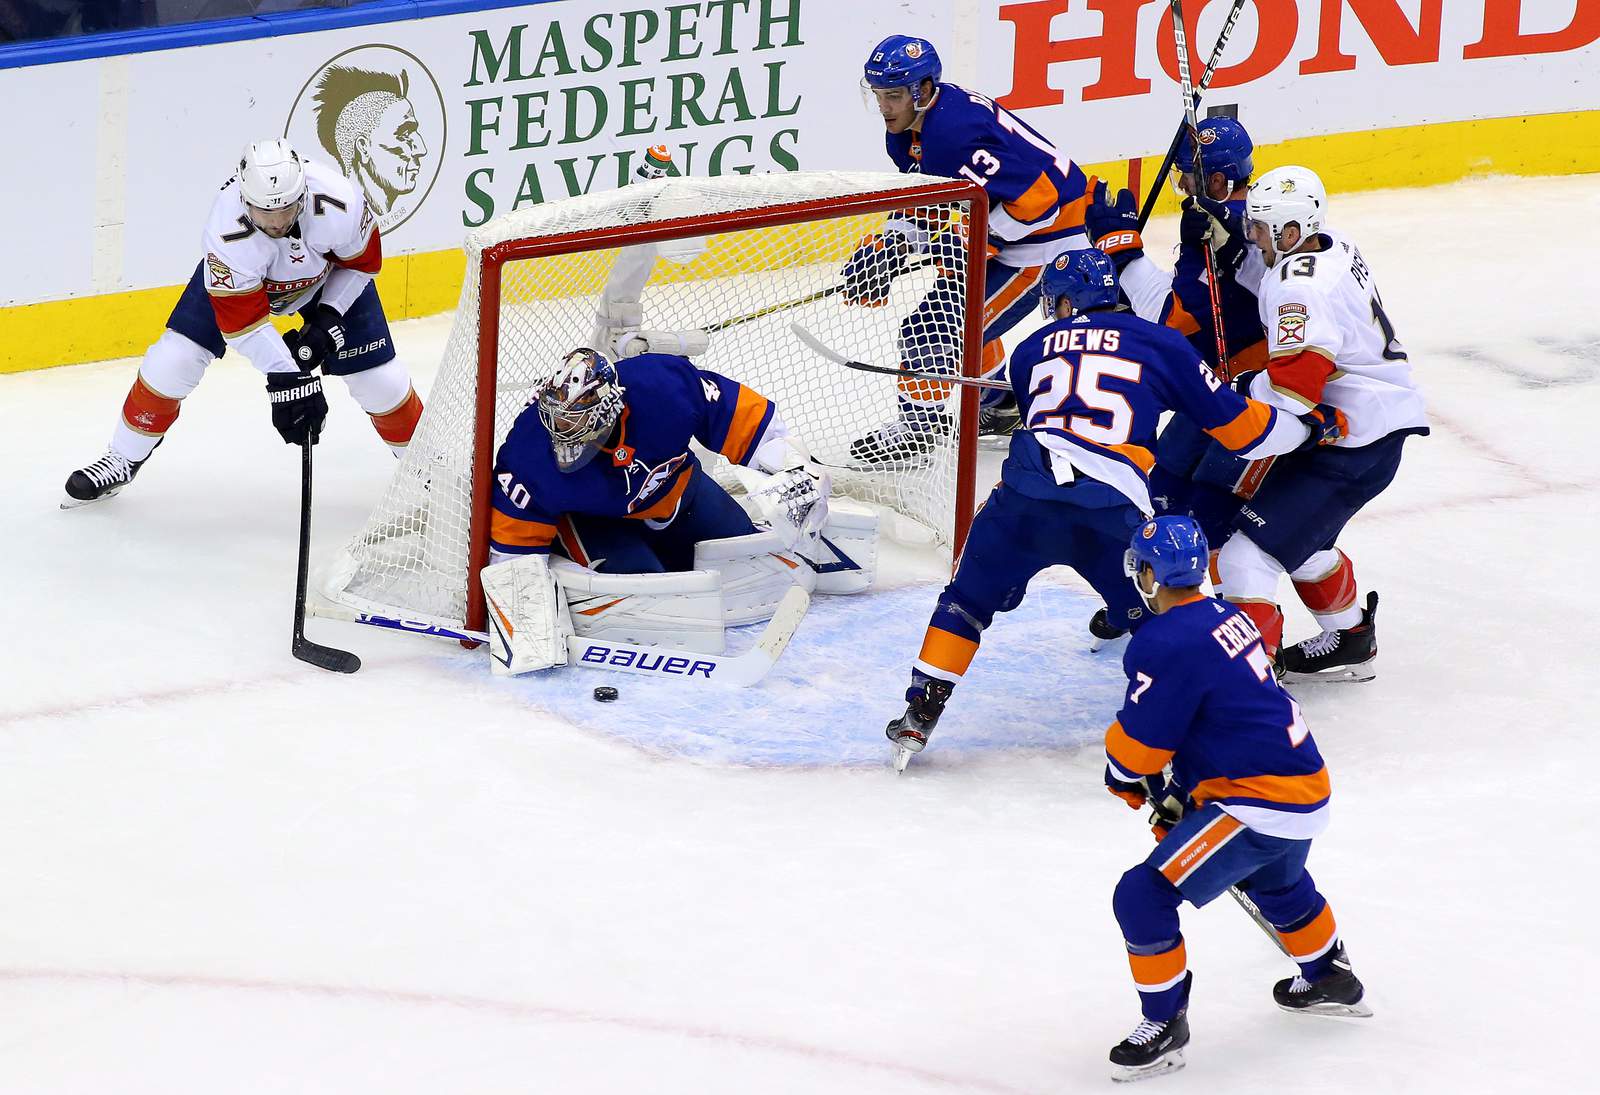 Varlamov stops 27 shots, Isles beat Panthers 2-1 in Game 1